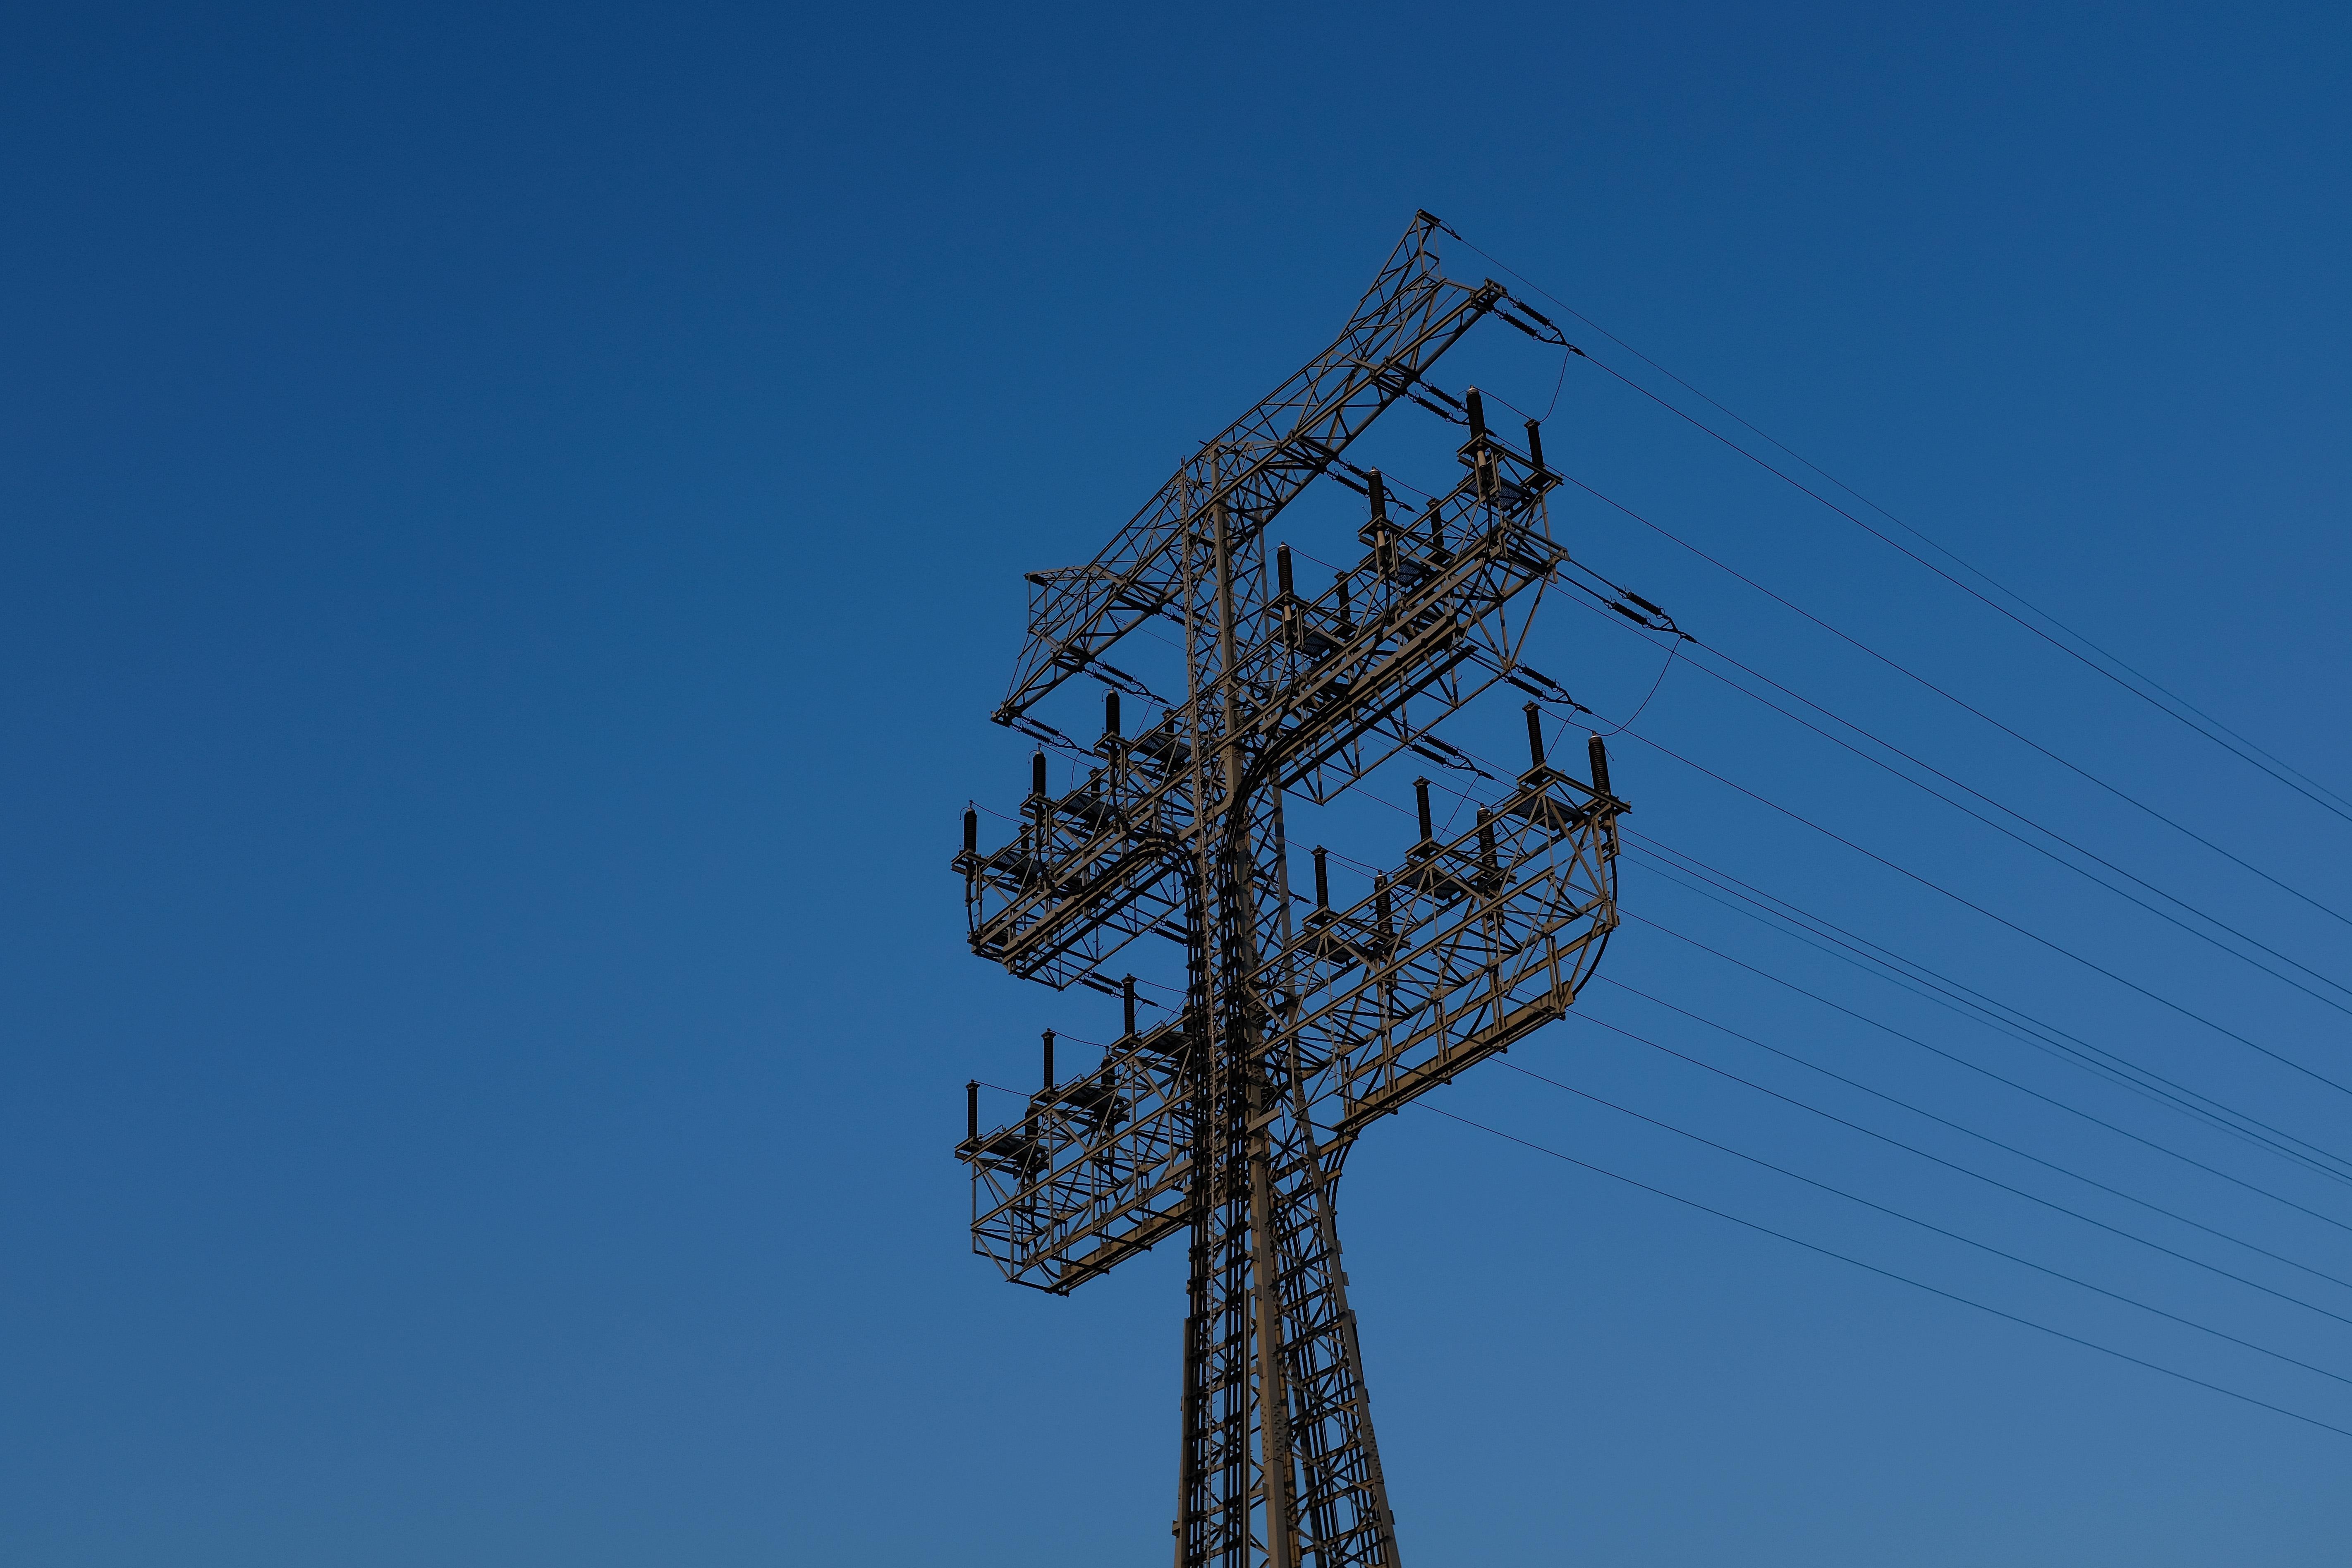 The FBI and DHS accused Russia of infiltrating the U.S. energy grid. 